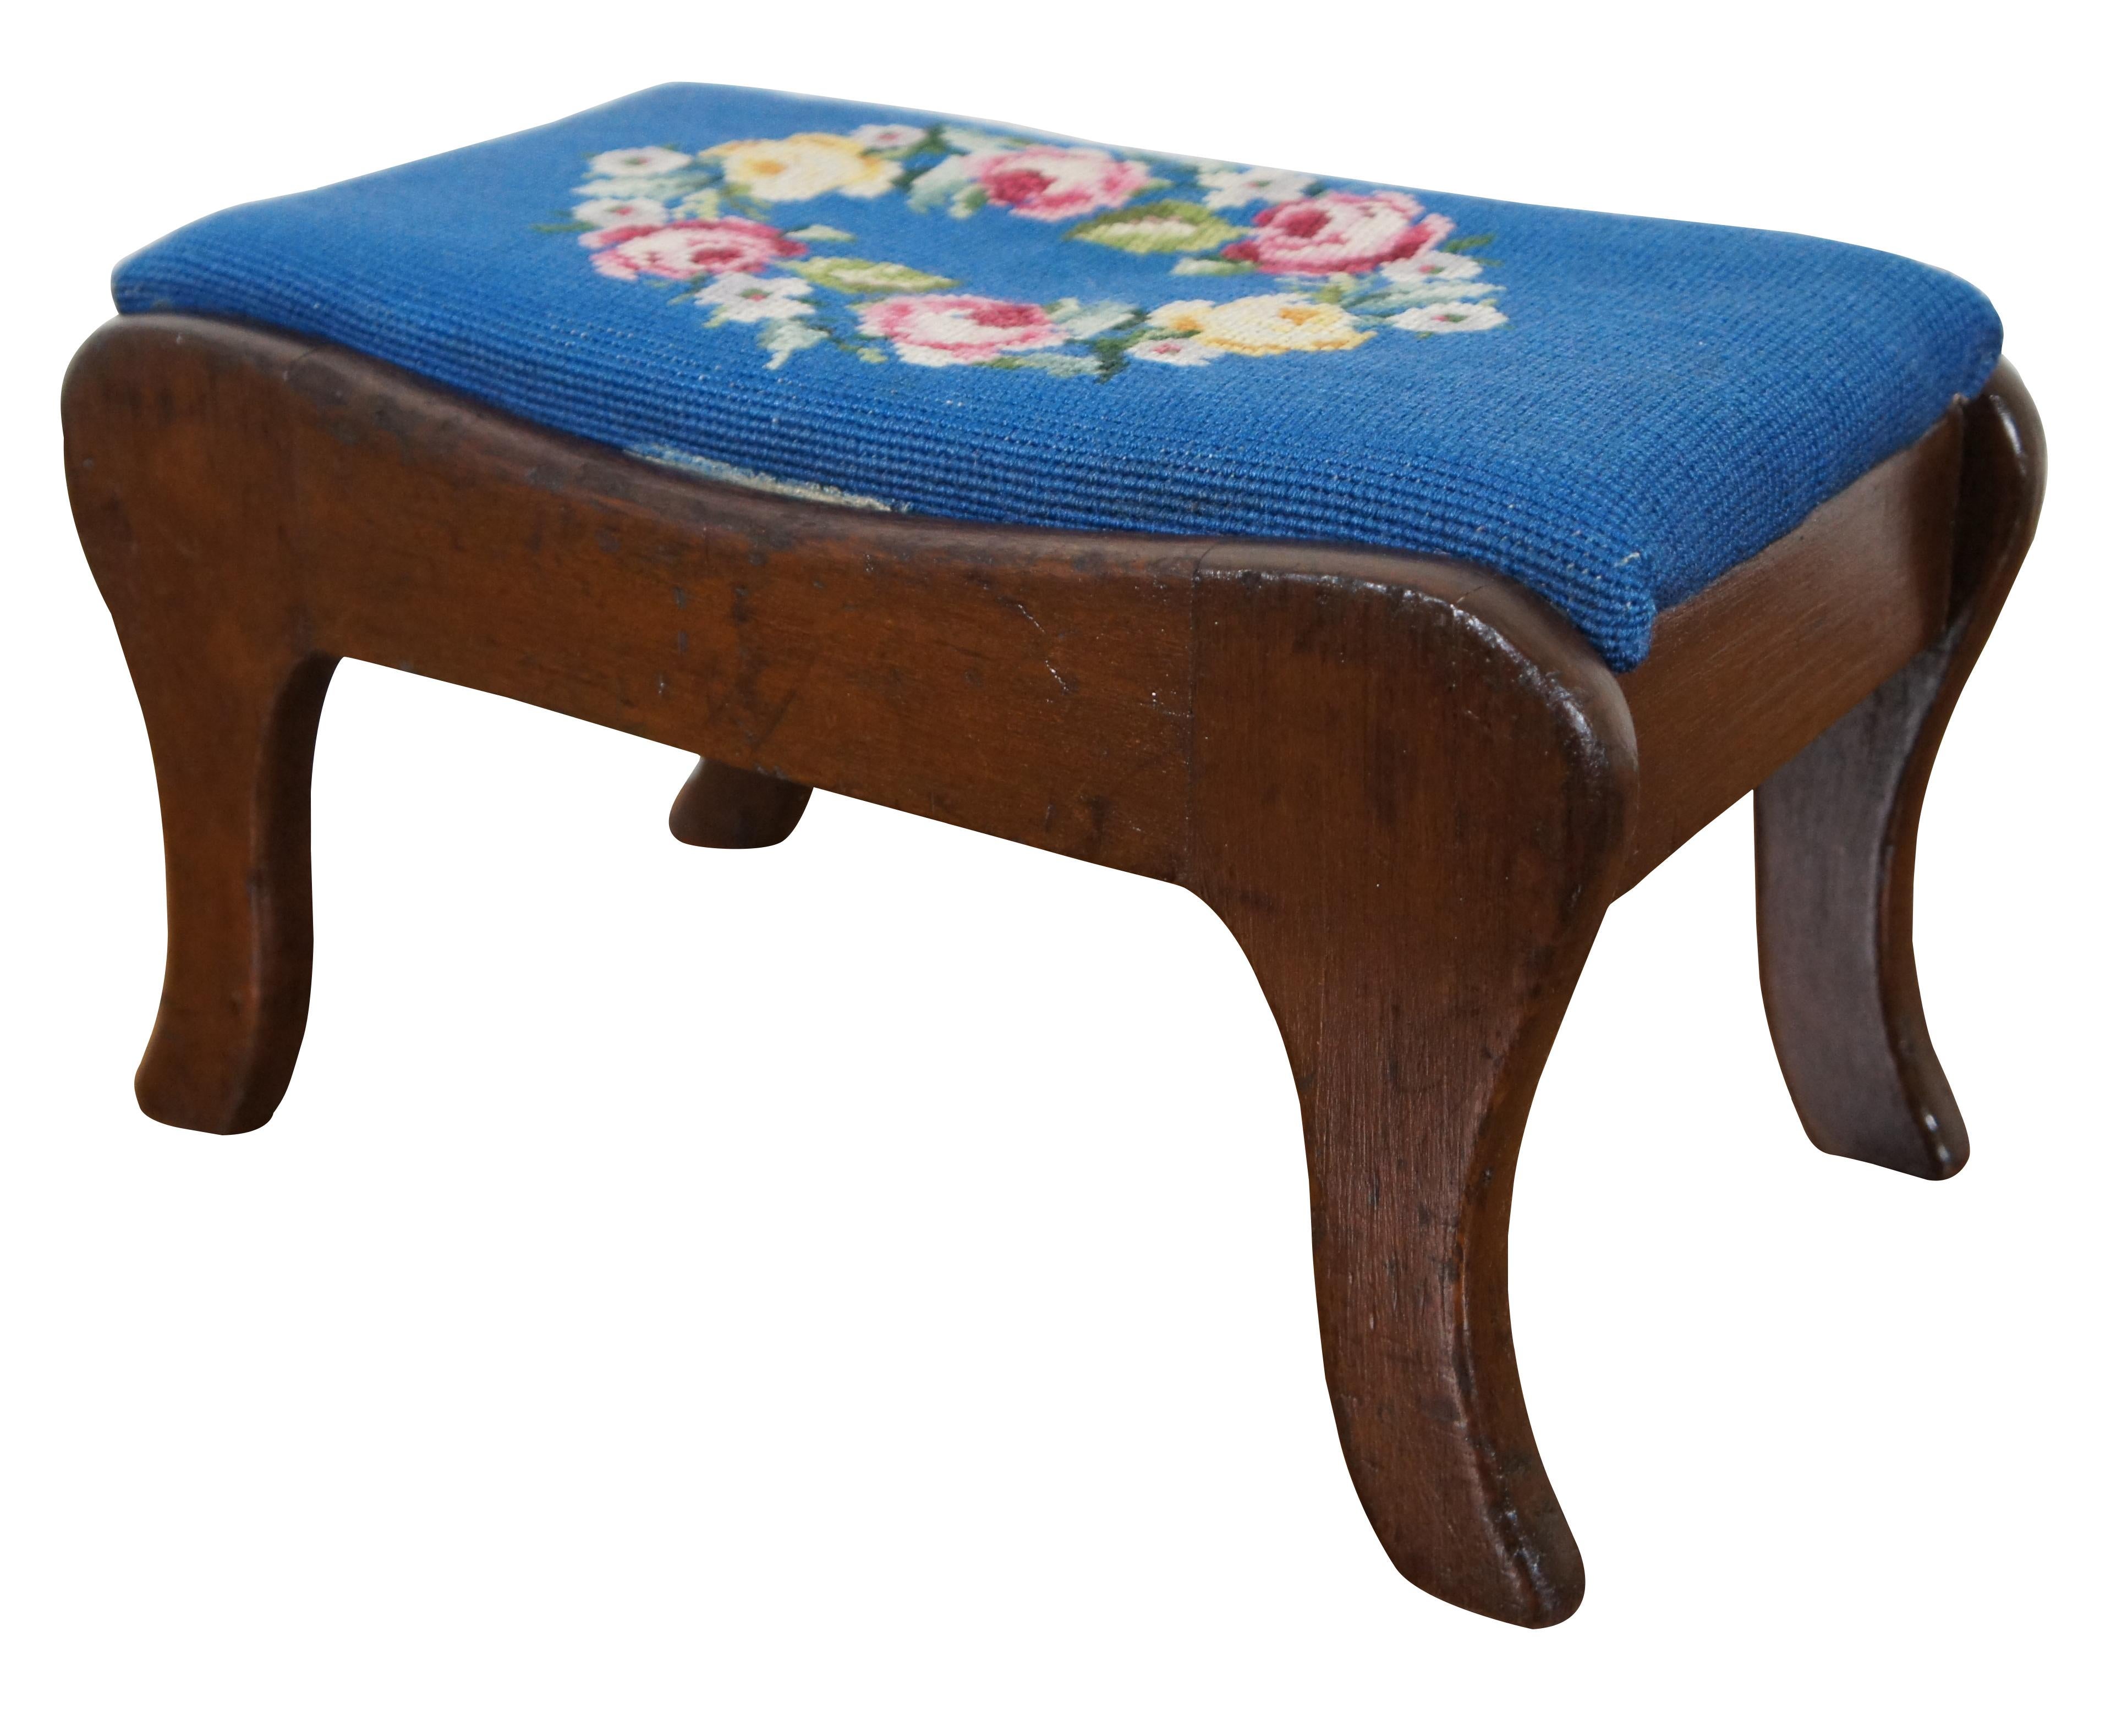 Antique Victorian walnut footstool with hand stitched blue needlepoint cushion showing a wreath of roses and morning glories on a blue ground.